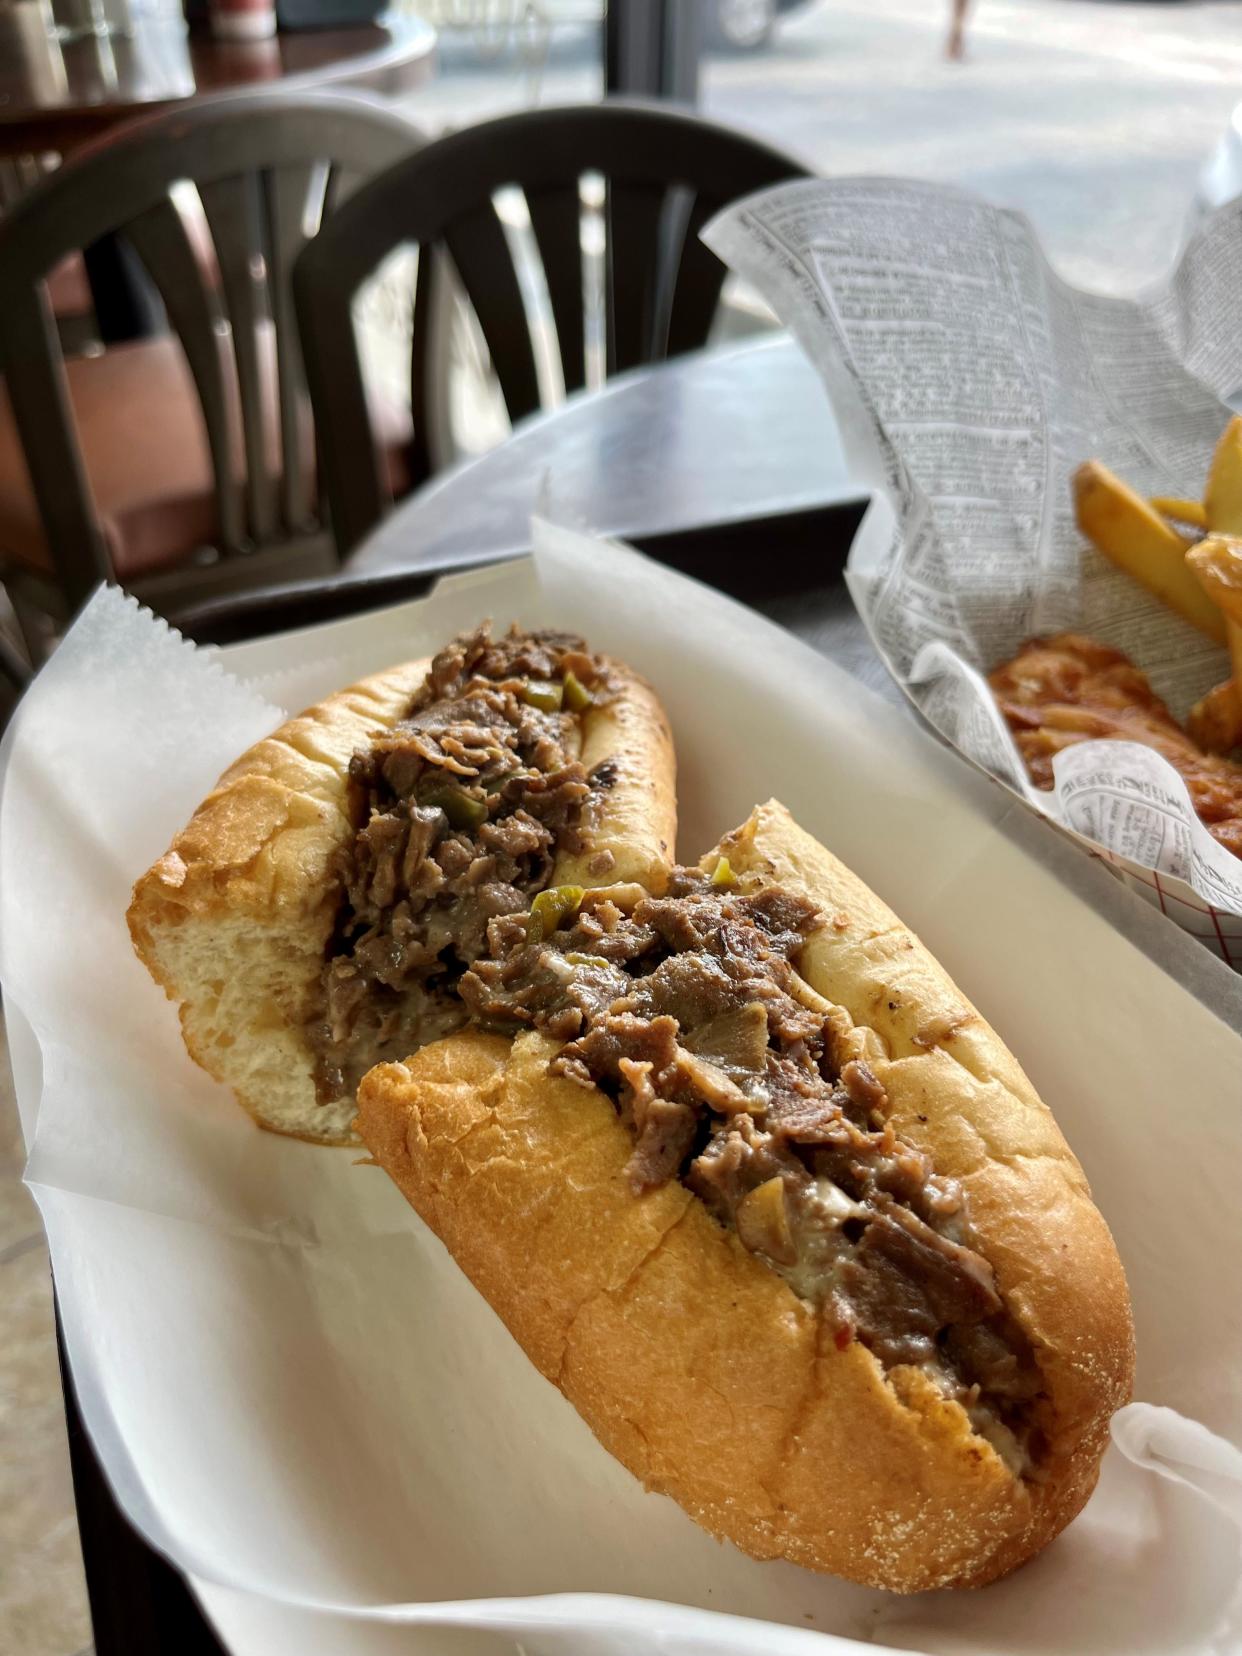 Pete's Fish & Chips in Cape Coral recently added some very good cheesesteaks to its menu.